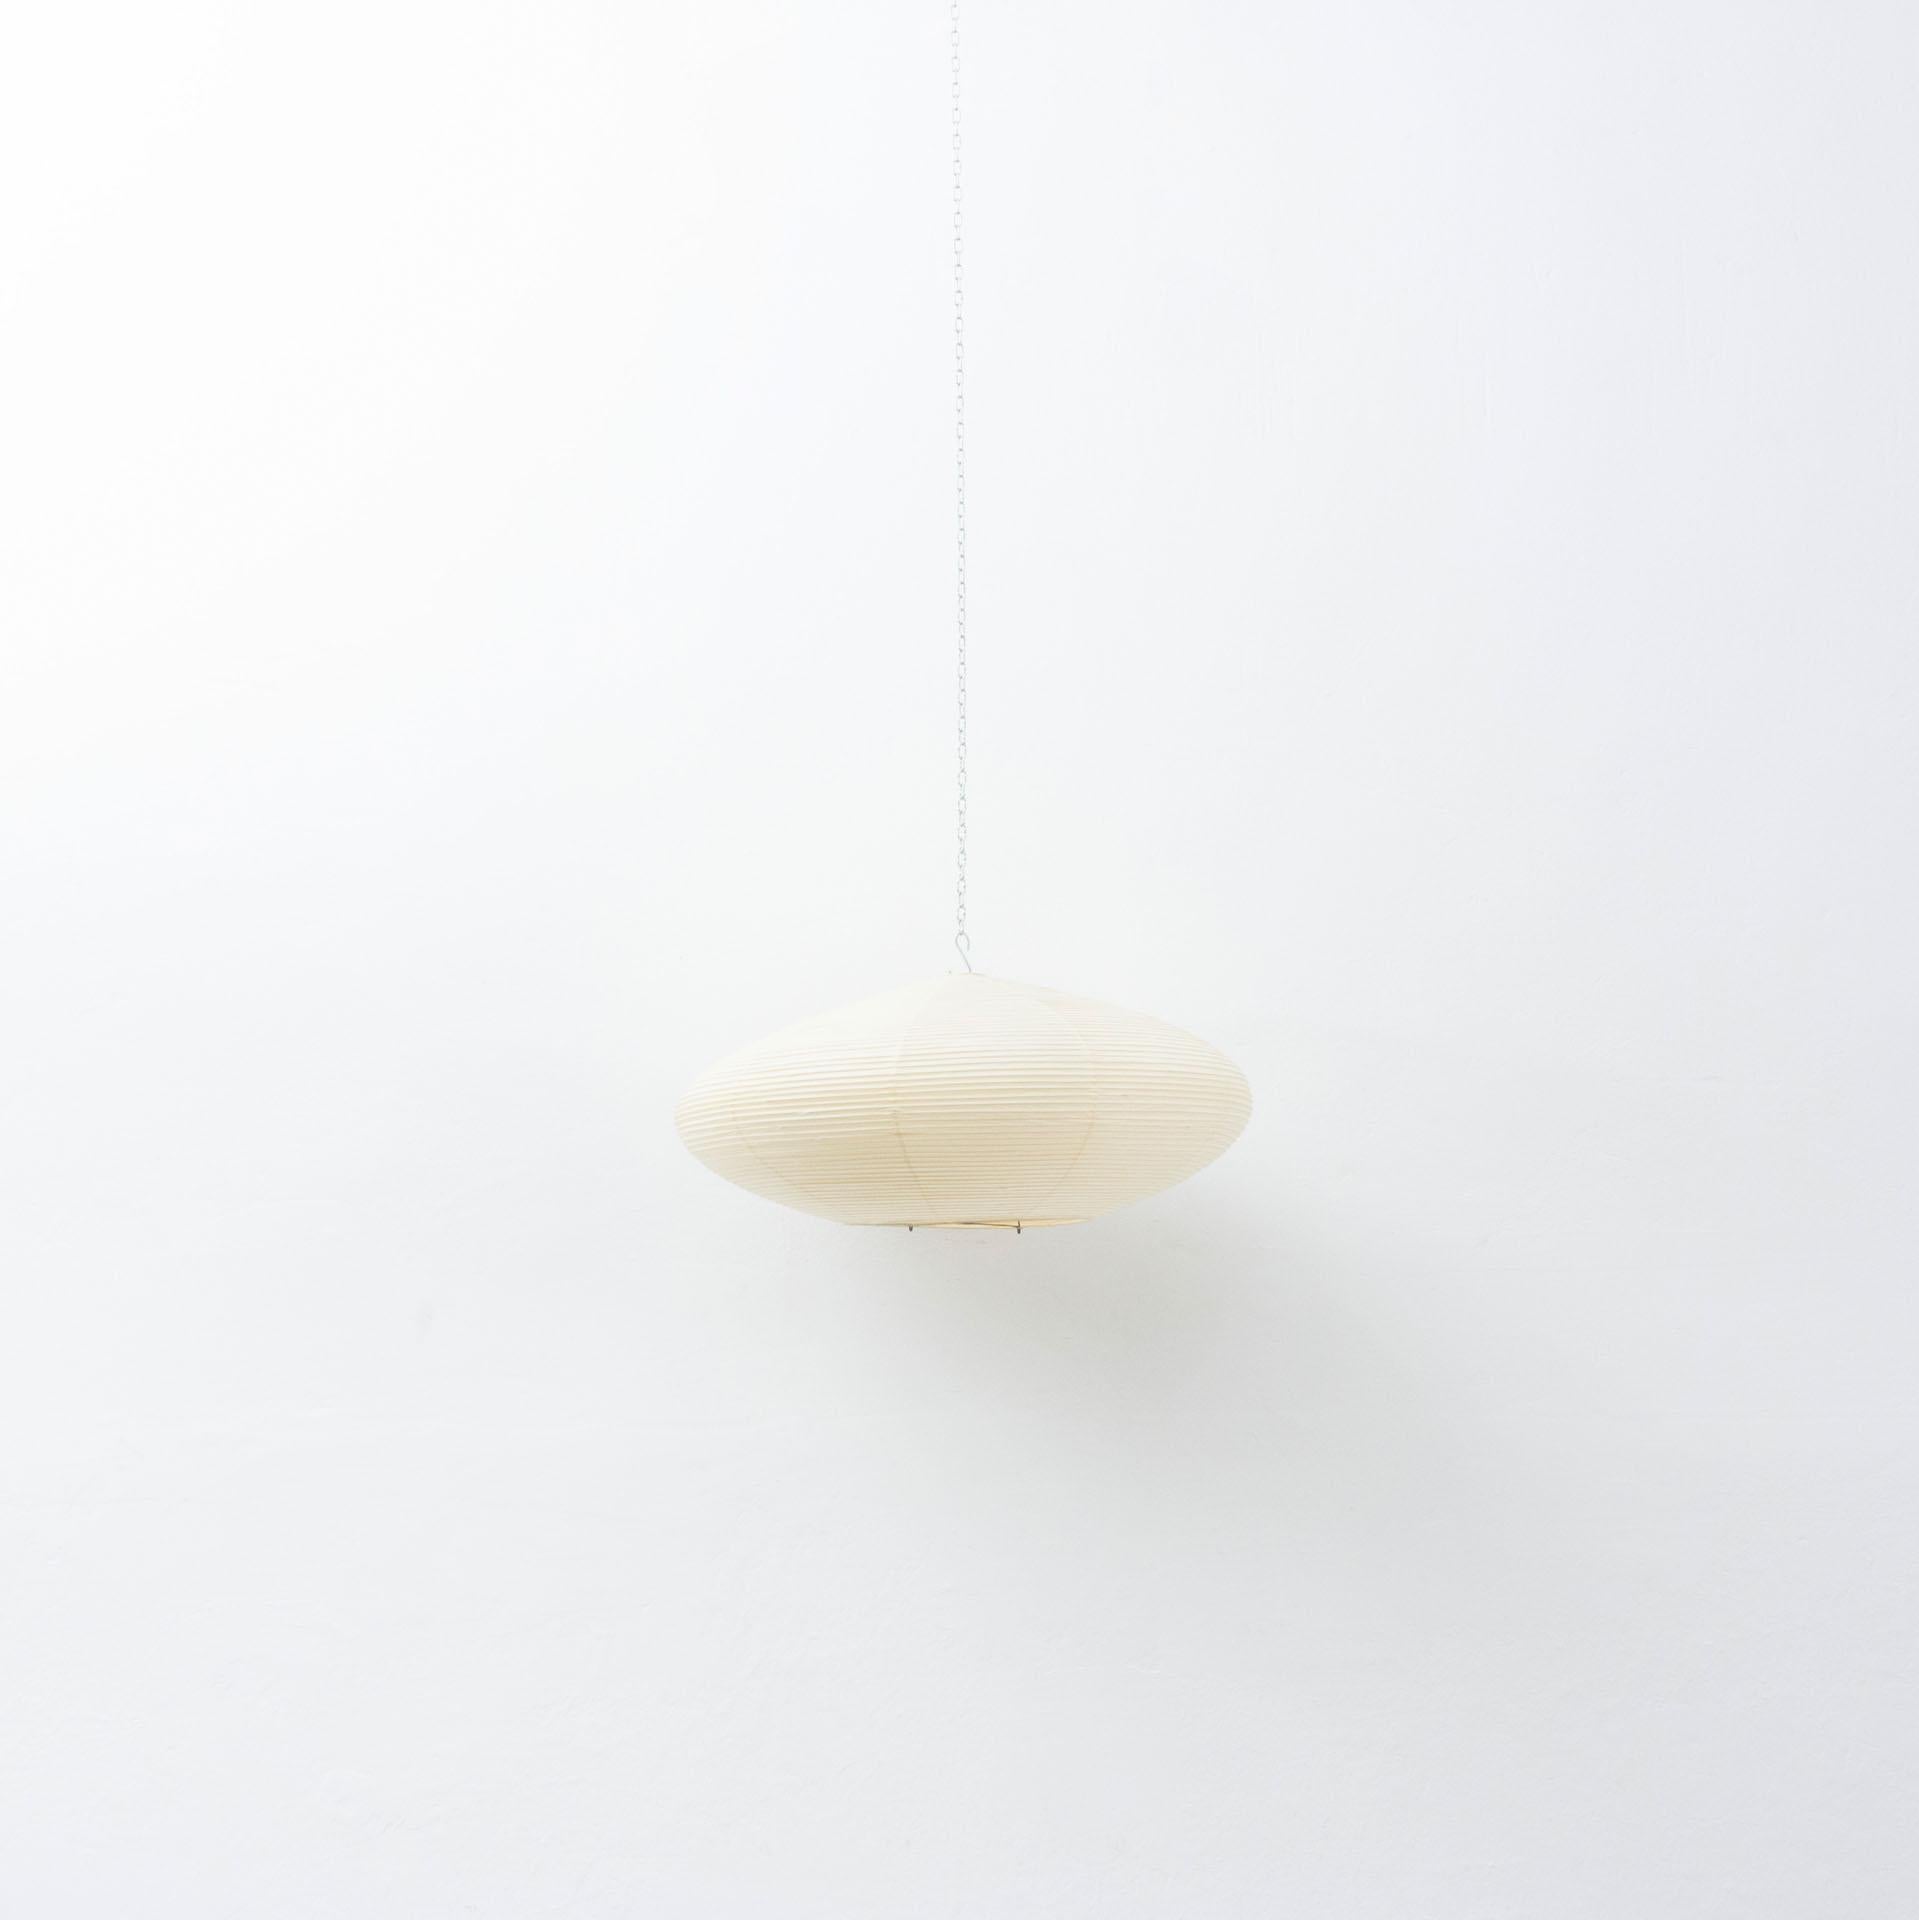 Pendant lamp model 21A designed by Isamu Noguchi.
Manufactured by Ozeki & Company Ltd. (Japan.)
Bamboo ribbing structure covered by washi paper manufactured according to the traditional procedures.

In original condition, with minor wear